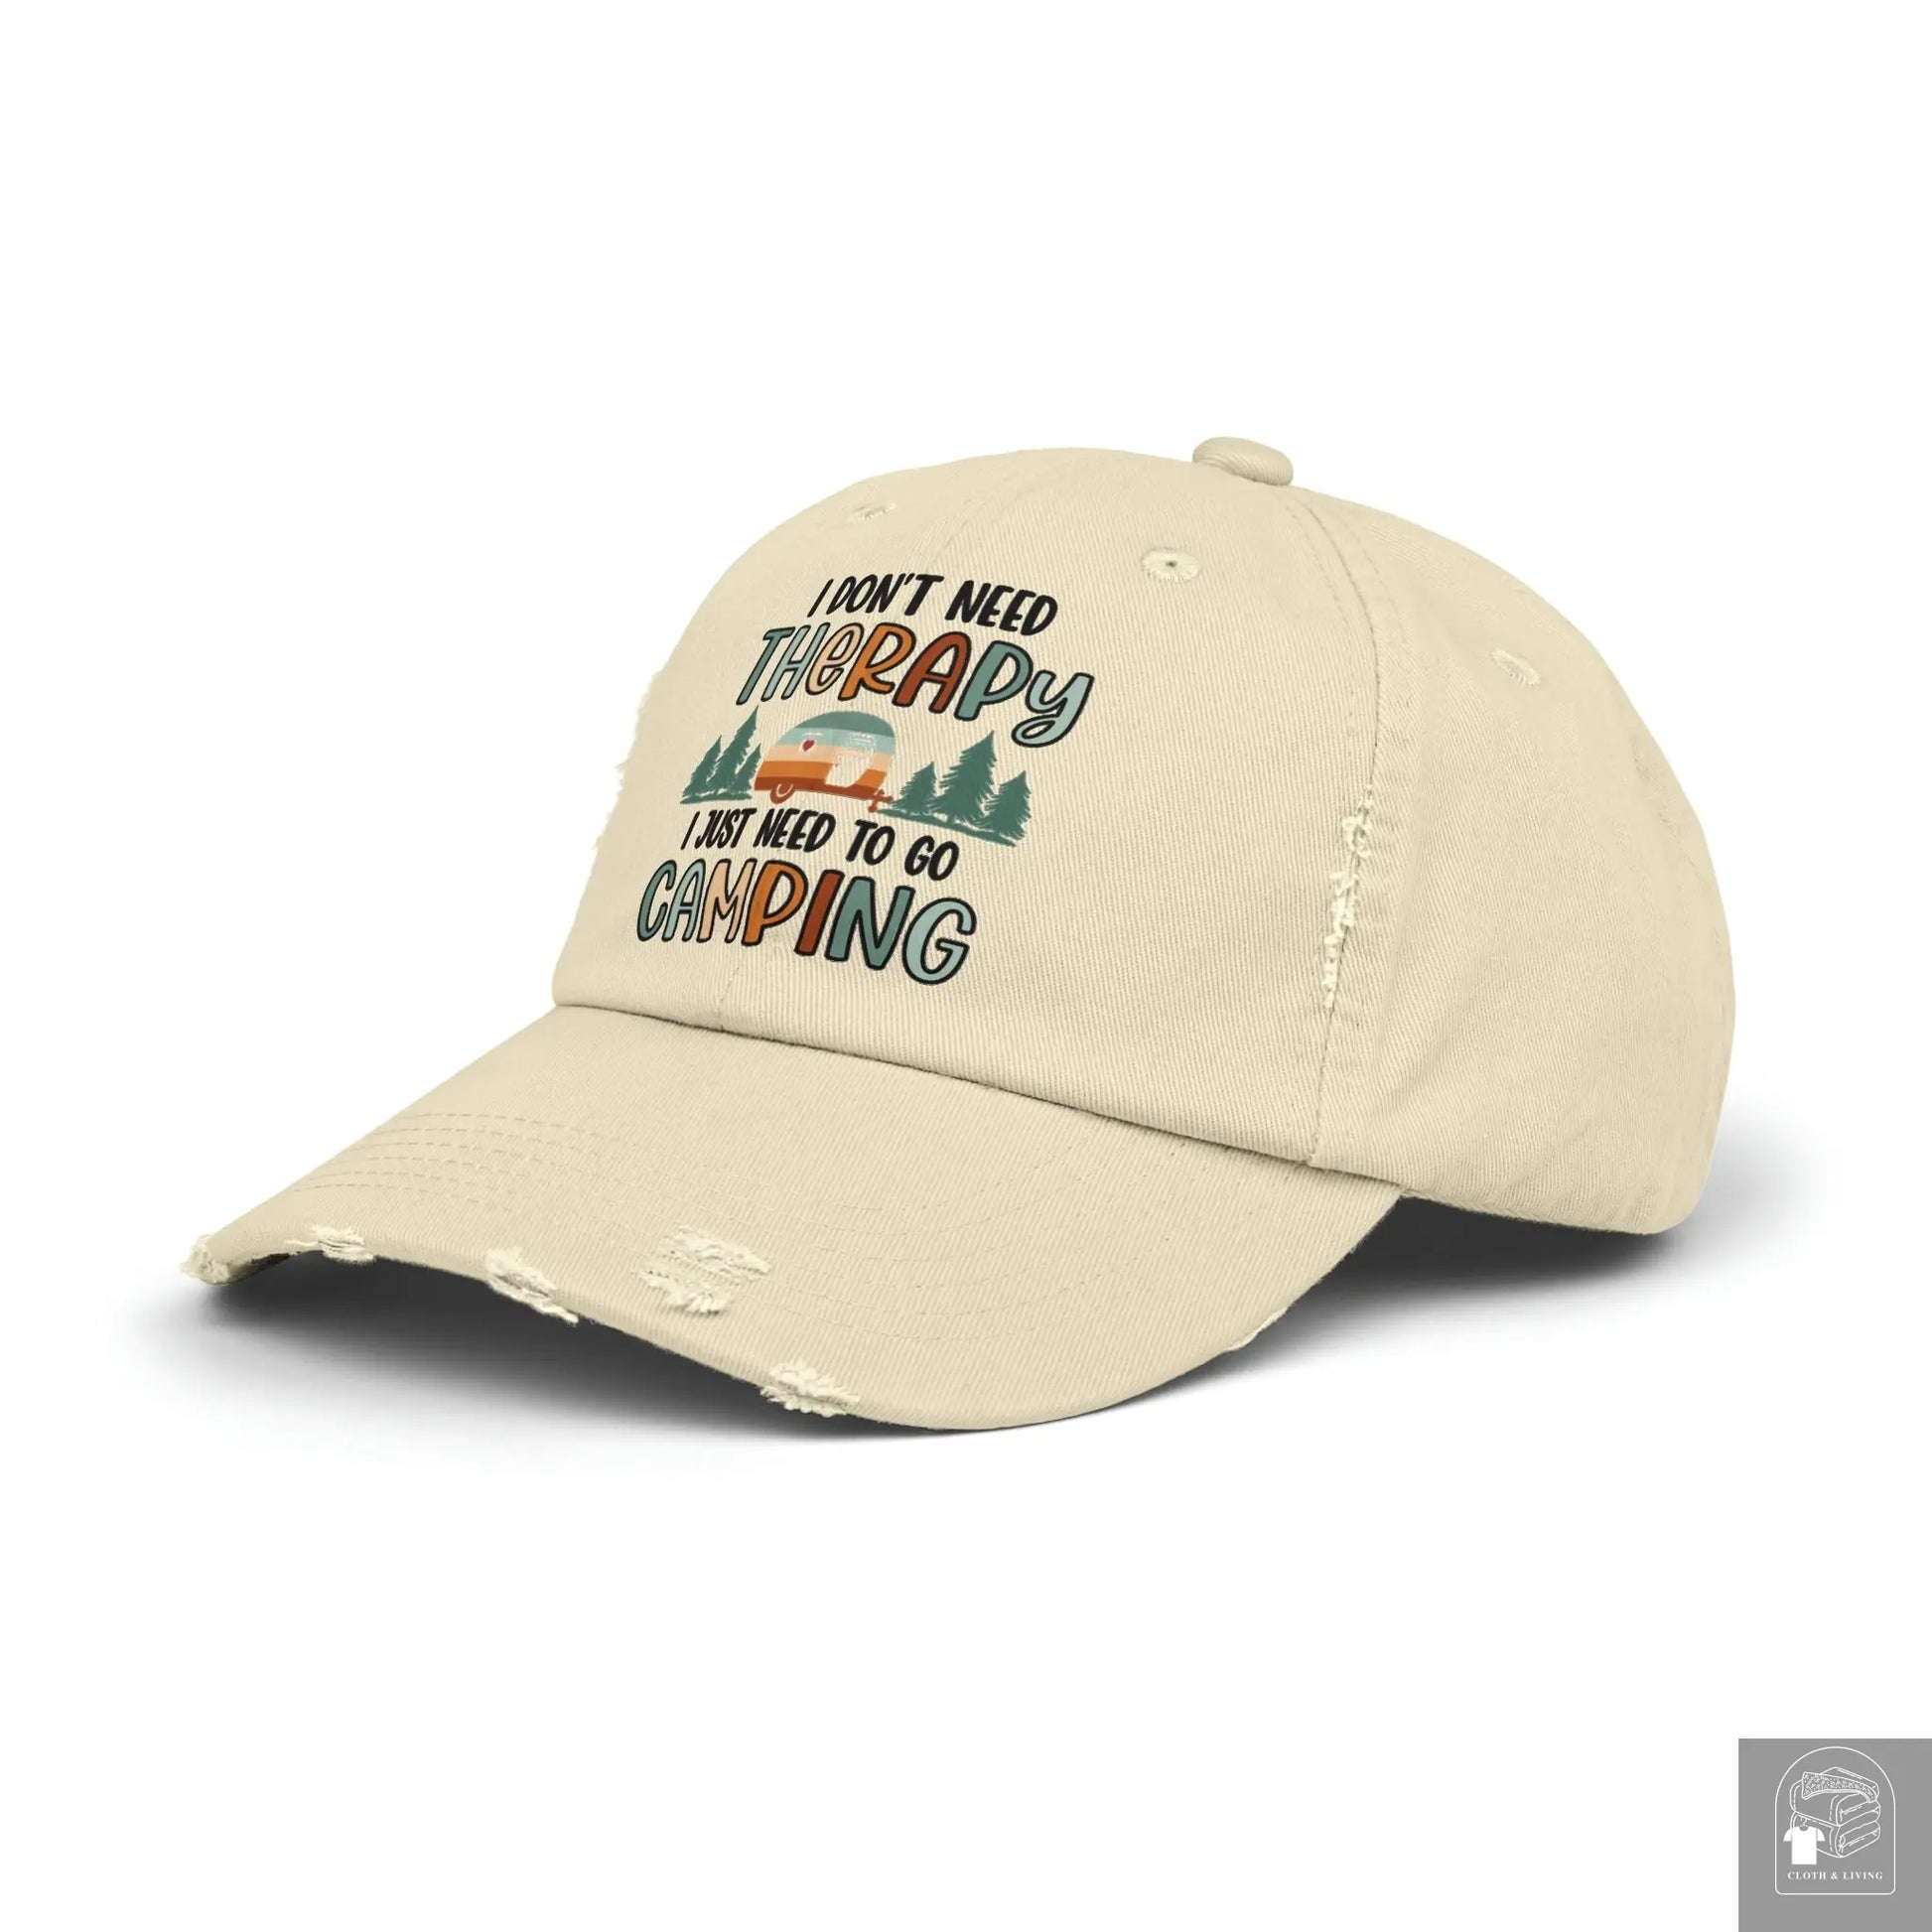 "I Just Need to go Camping" Unisex Distressed Cap  Cloth & Living